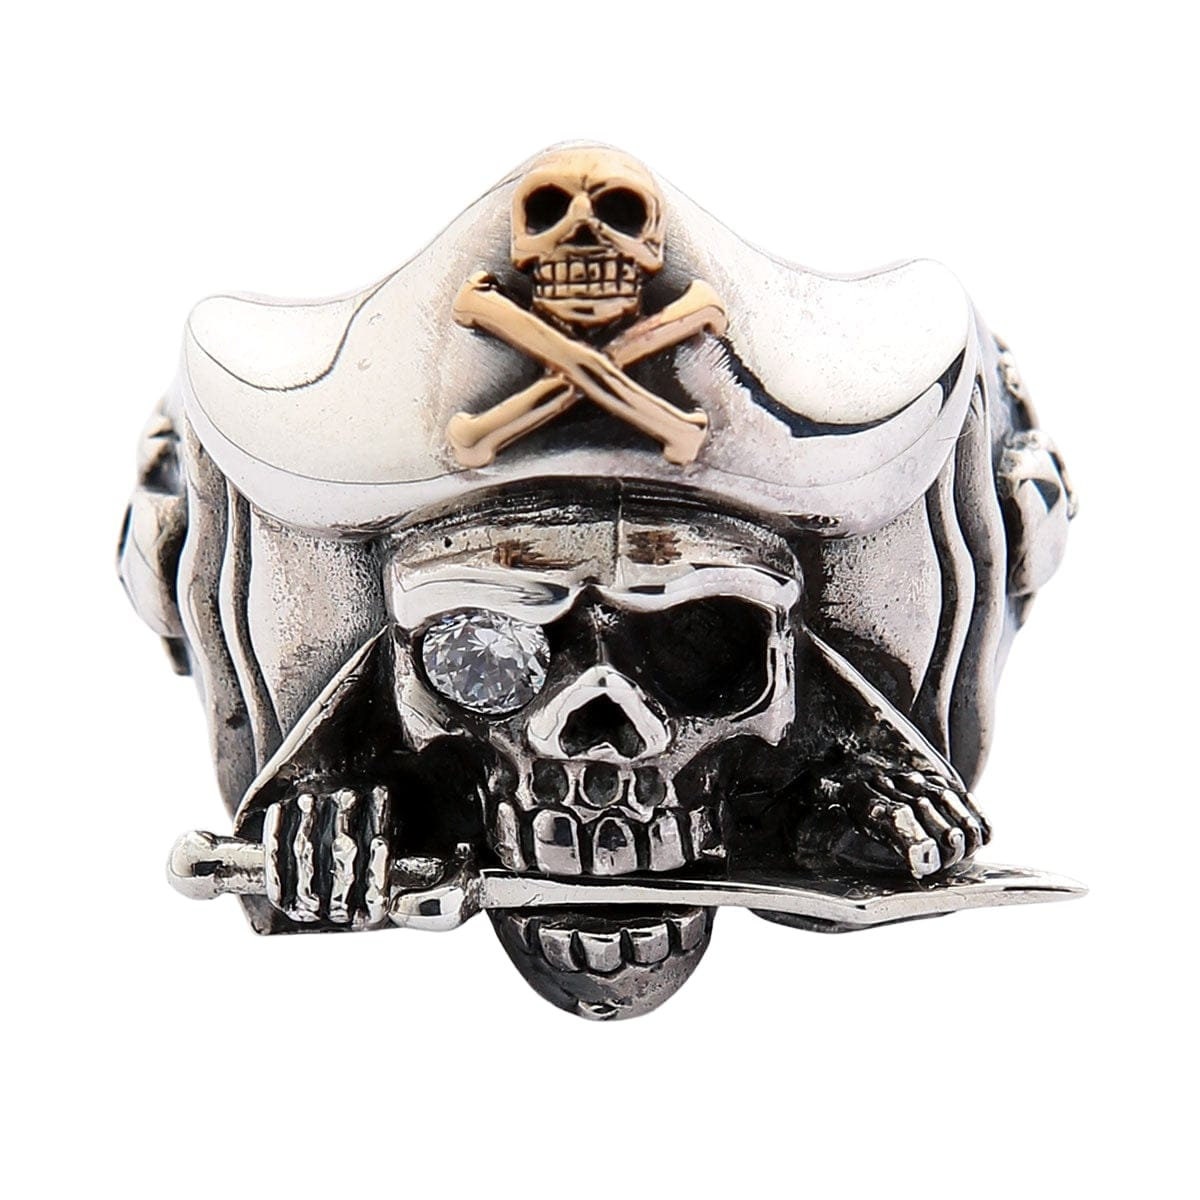 Skull and Crossbones Ring - Bill Wall Leather Inc.